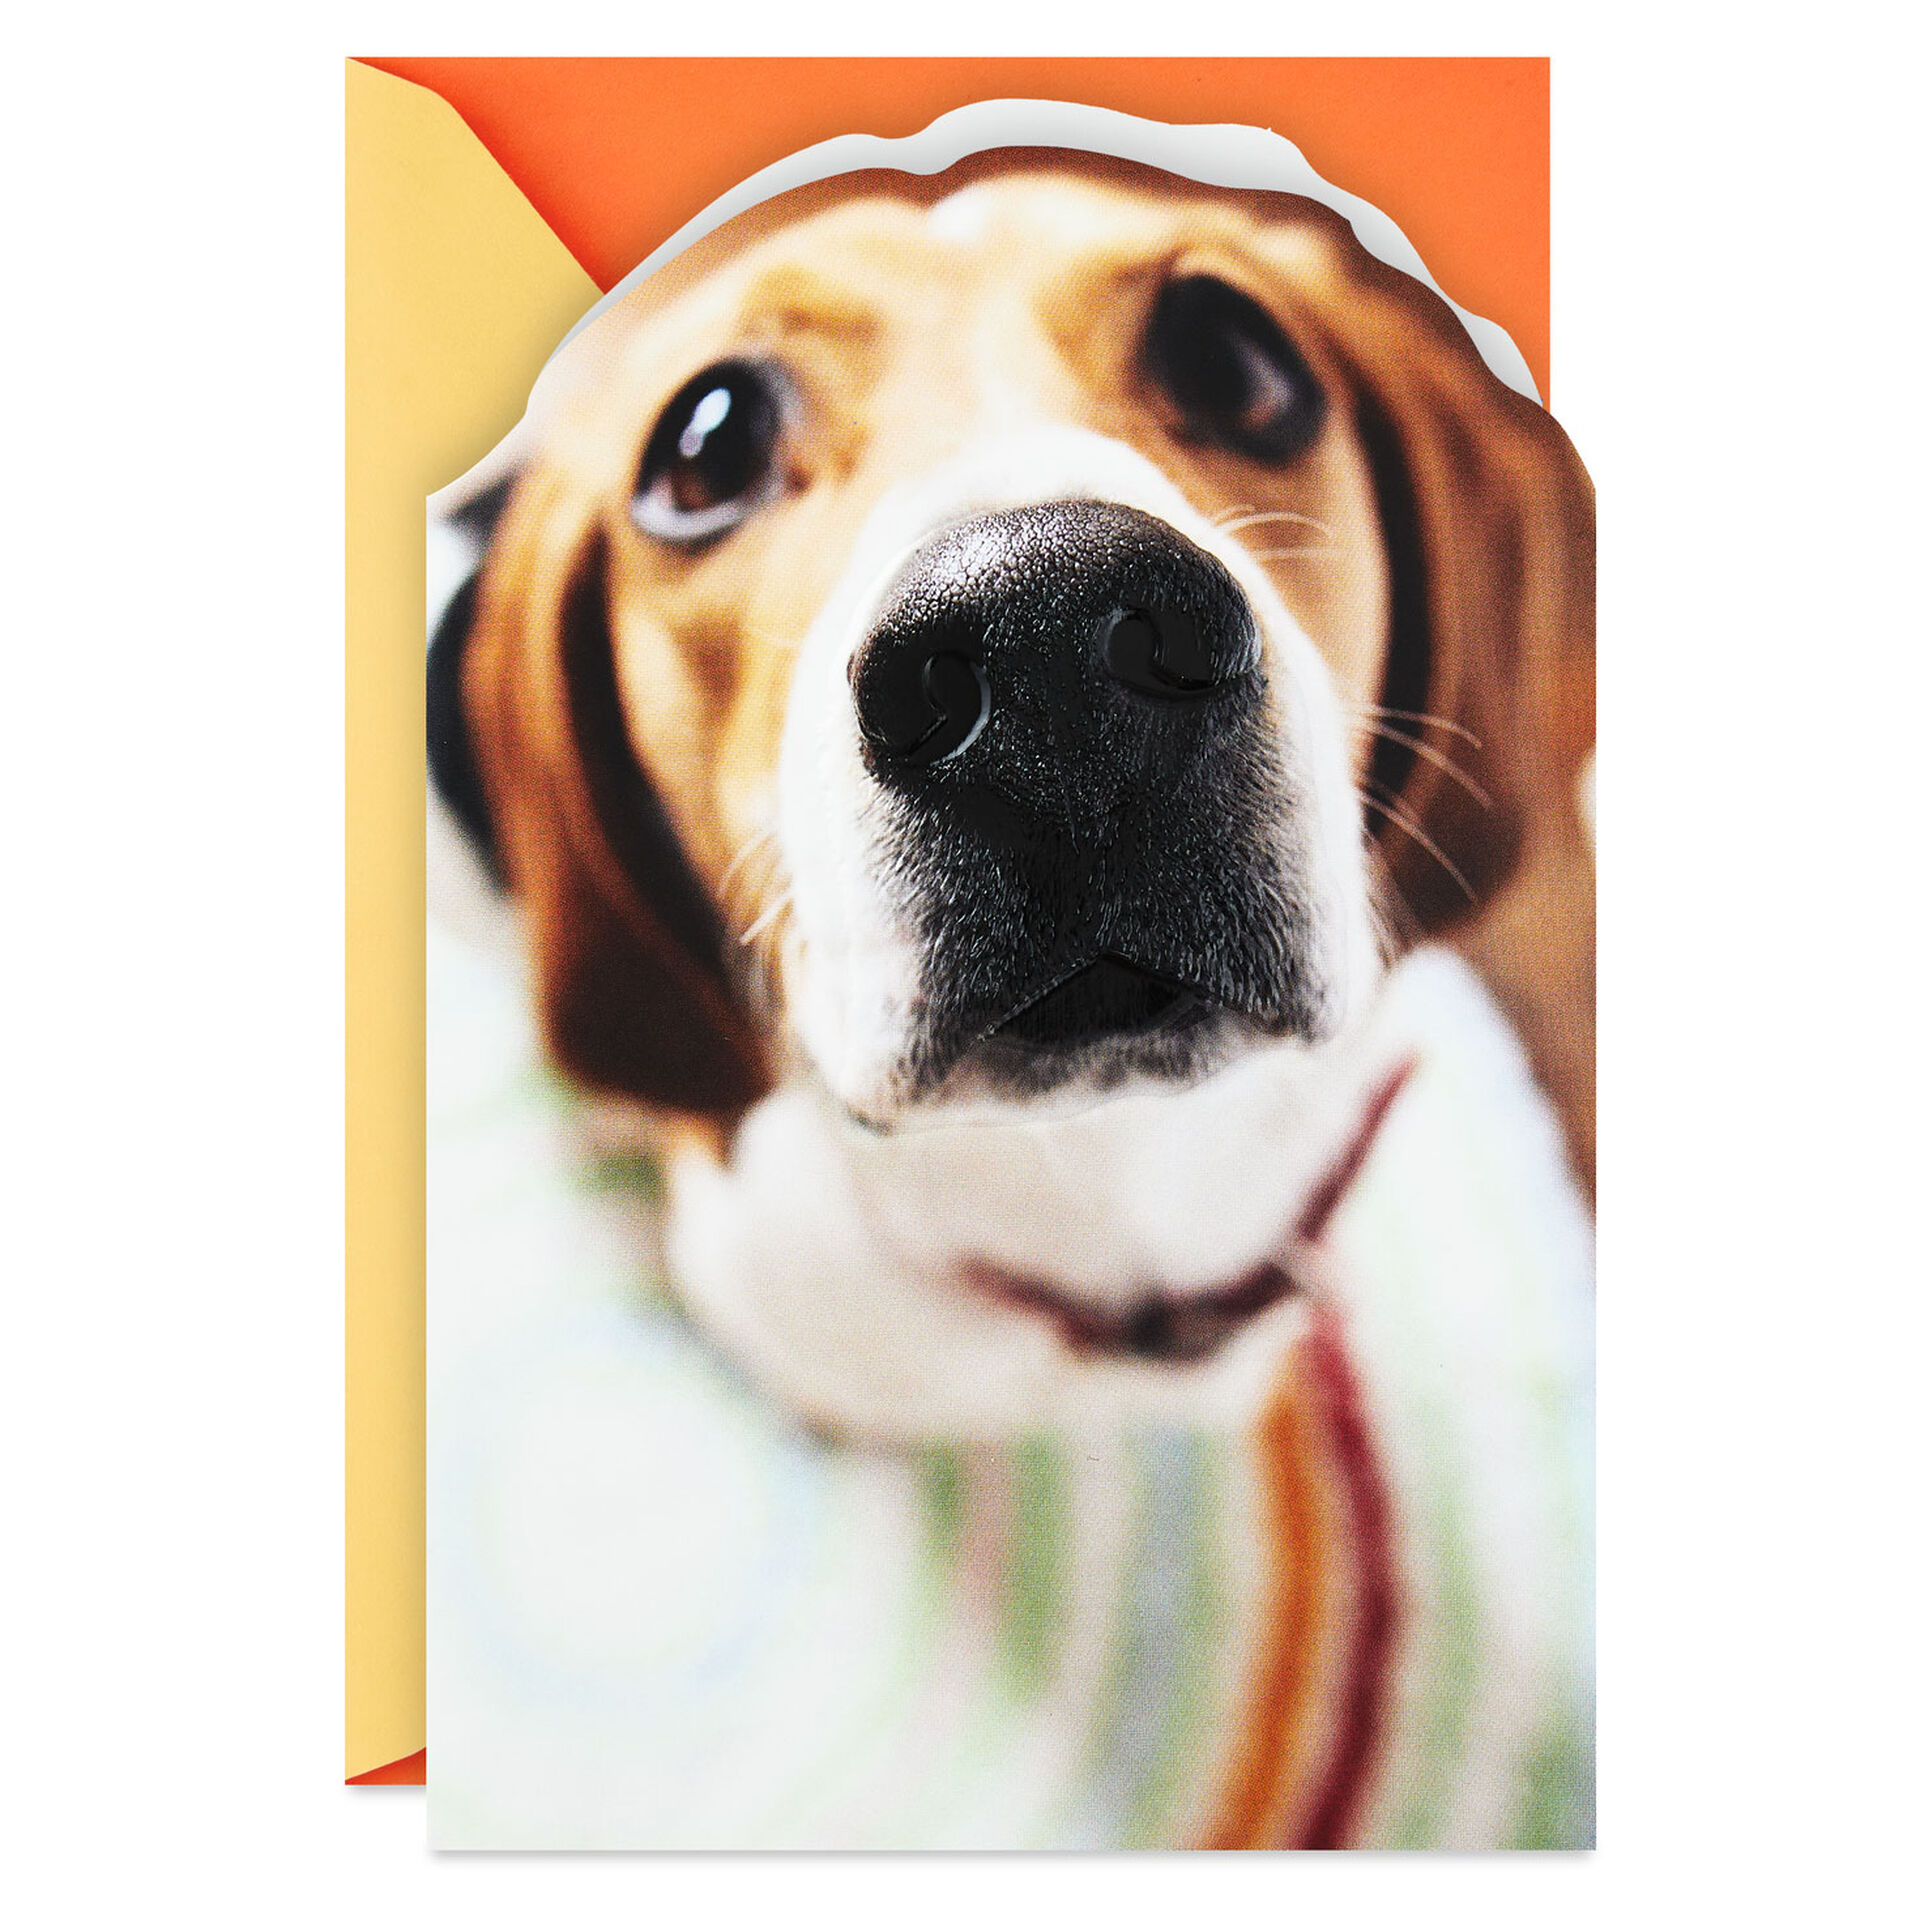 CloseUp-Photo-of-Dogs-Face-Funny-Birthday-Card_299HBD9632_01